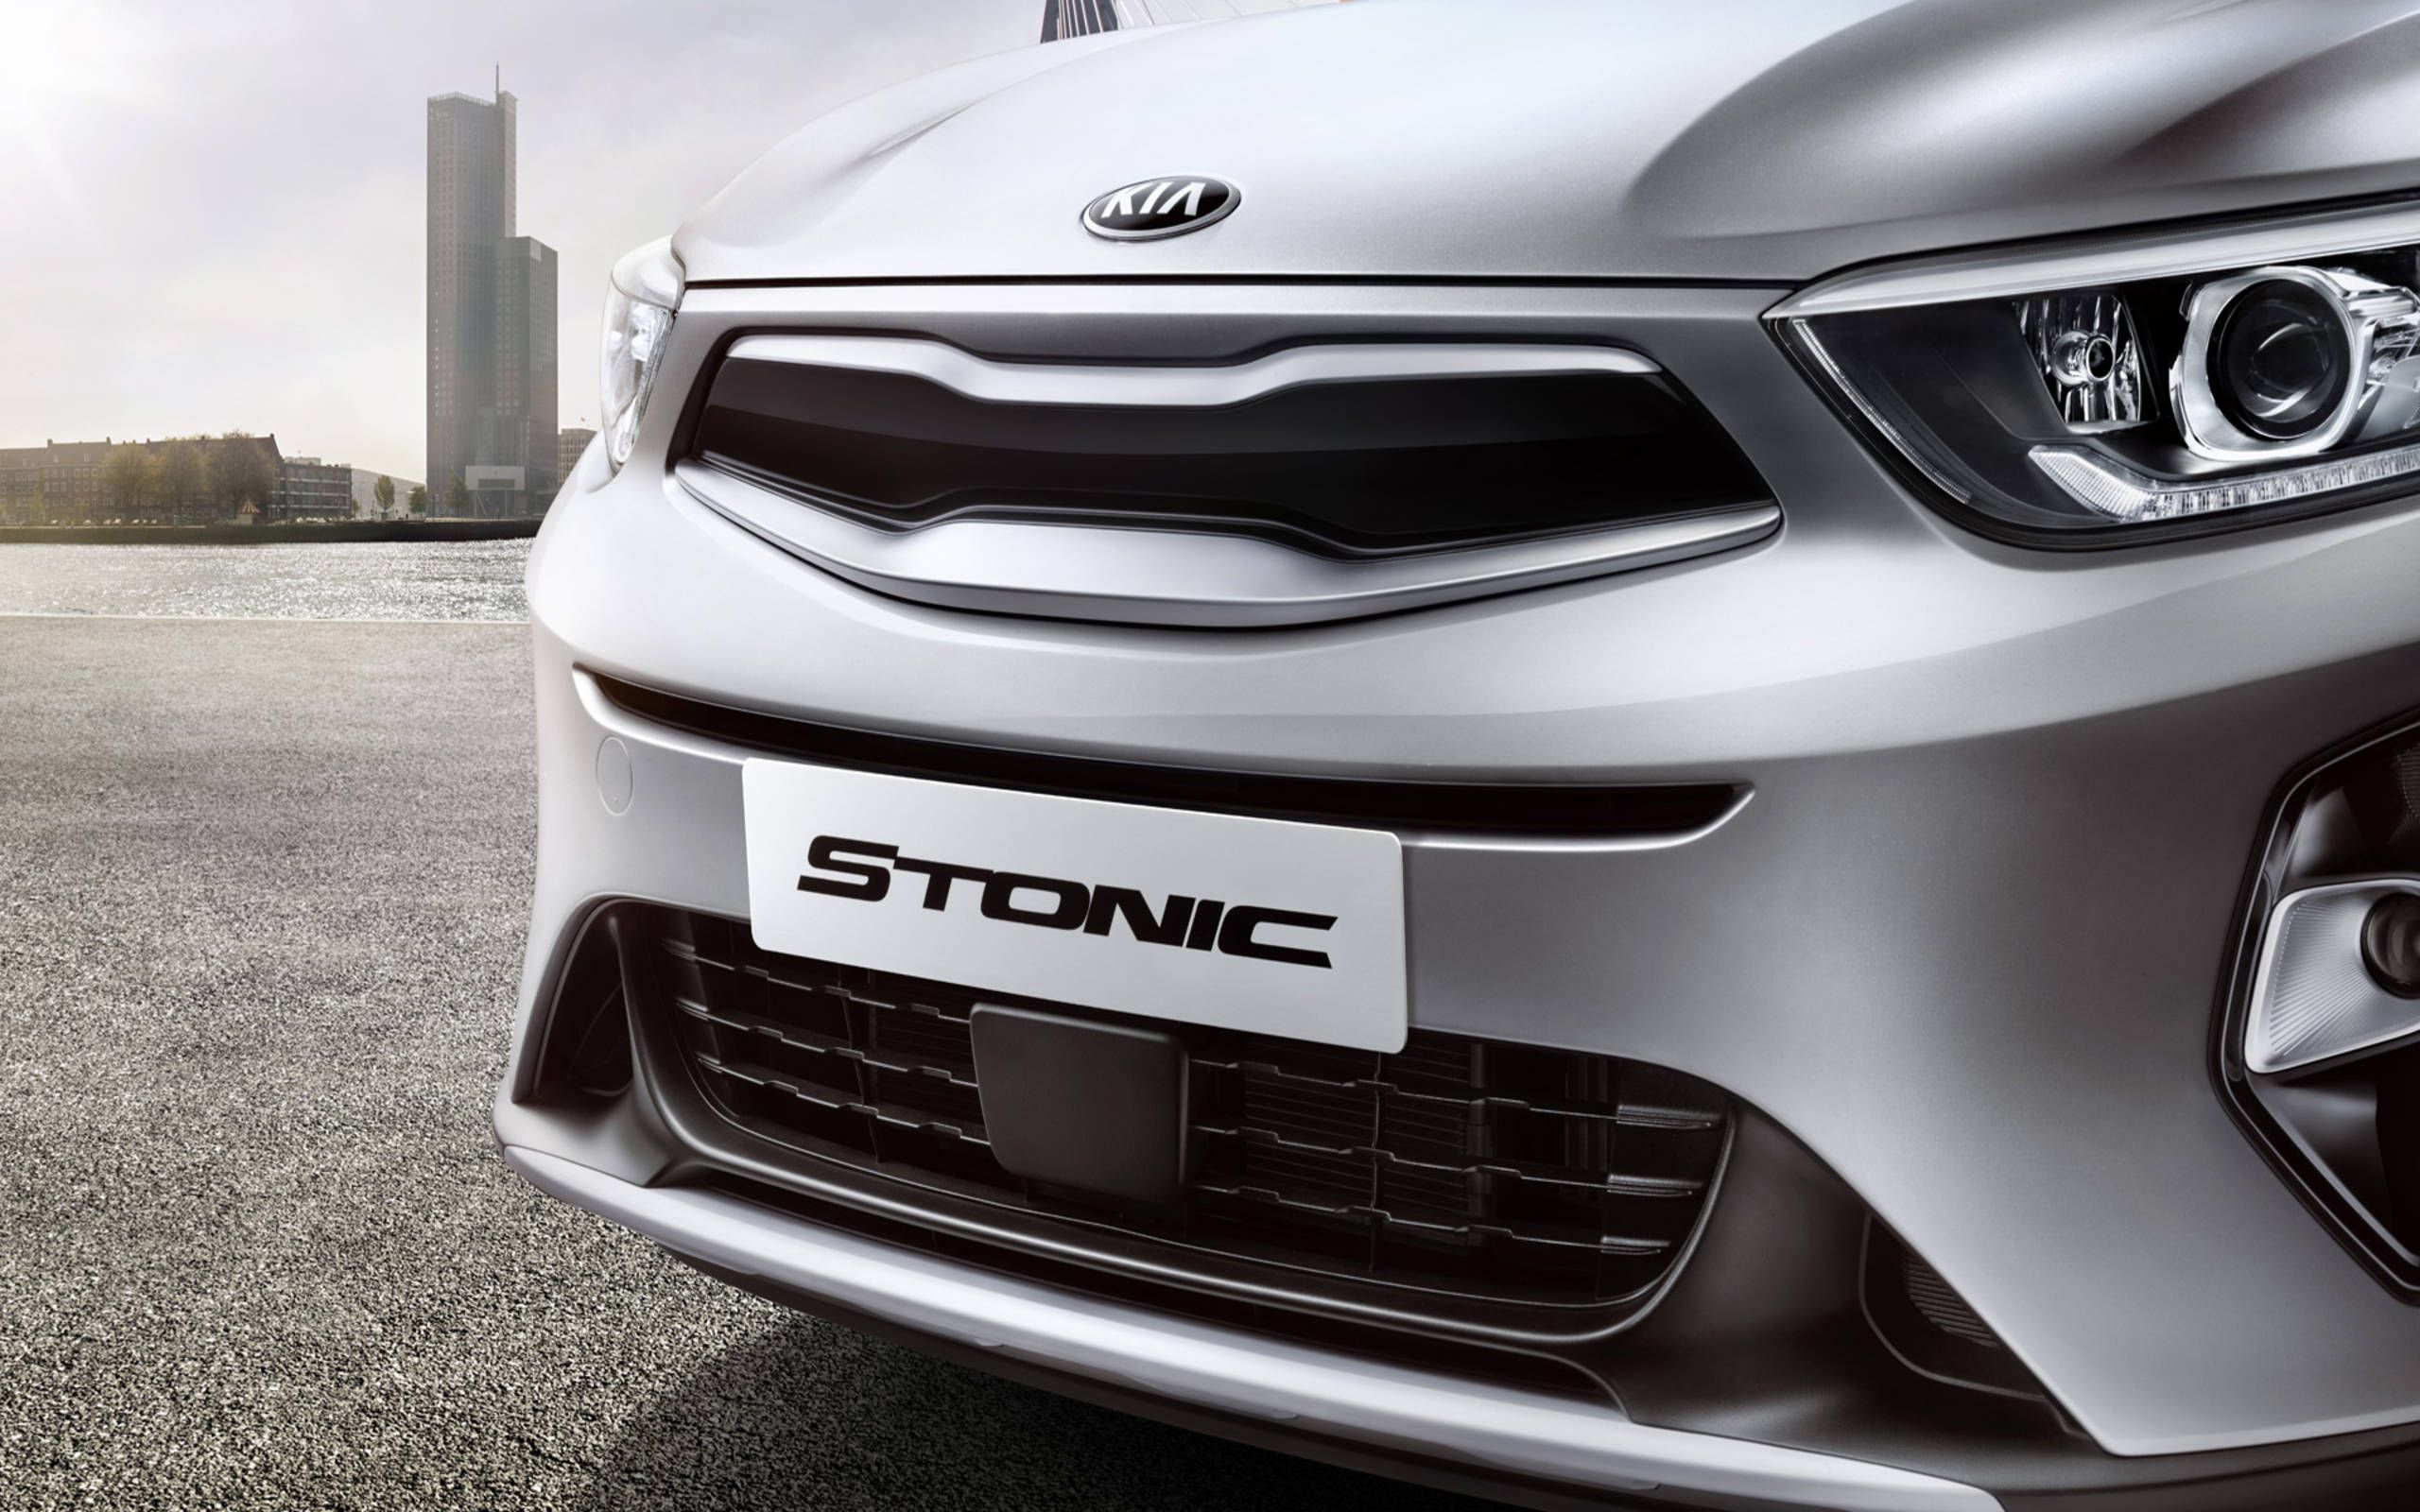 Kia Stonic is ready to battle subcompact crossovers, but is it